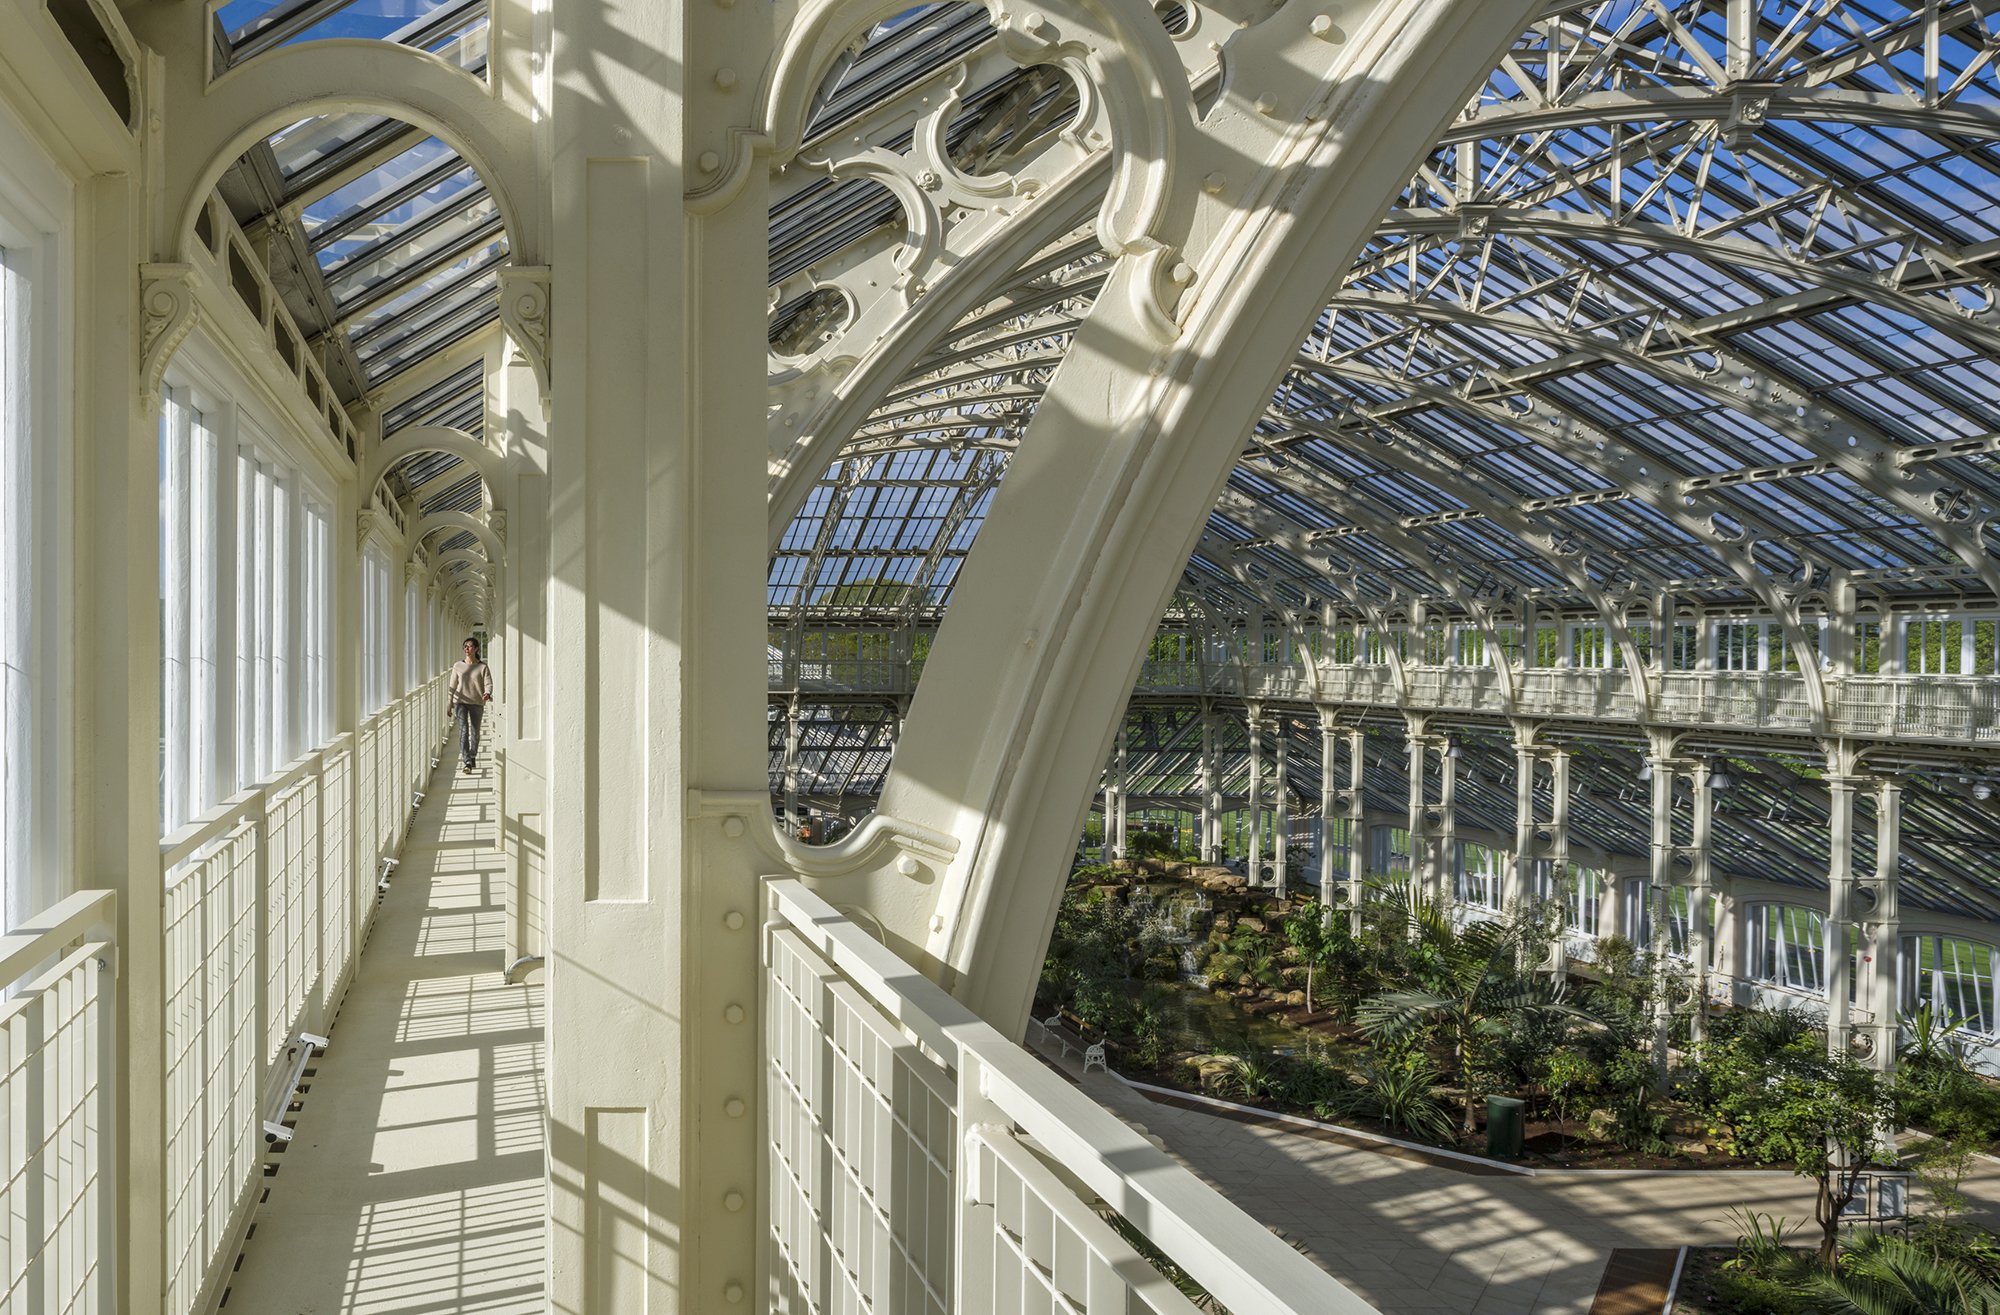 Temperate House after Restoration